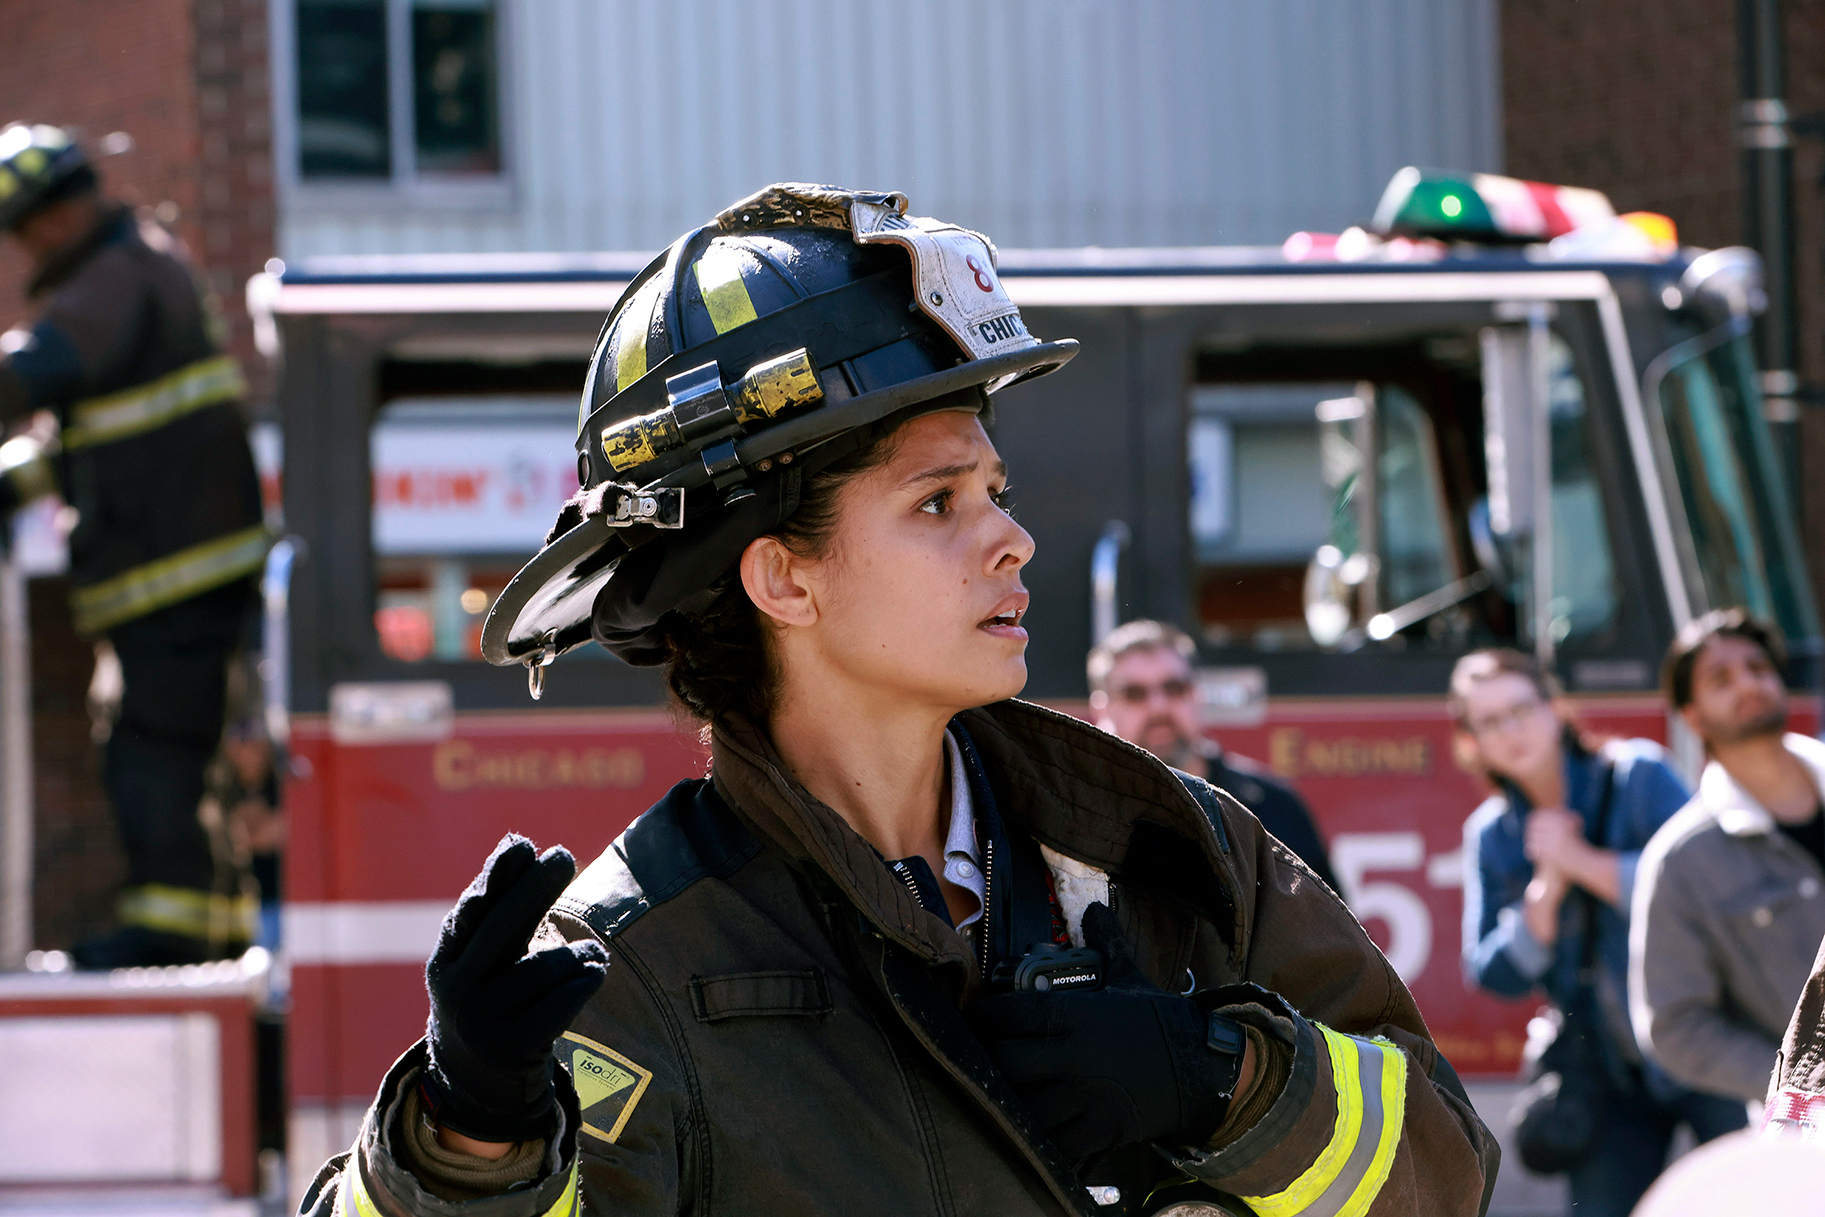 When Does The New Episode Of Chicago Fire Come On? ReviewView